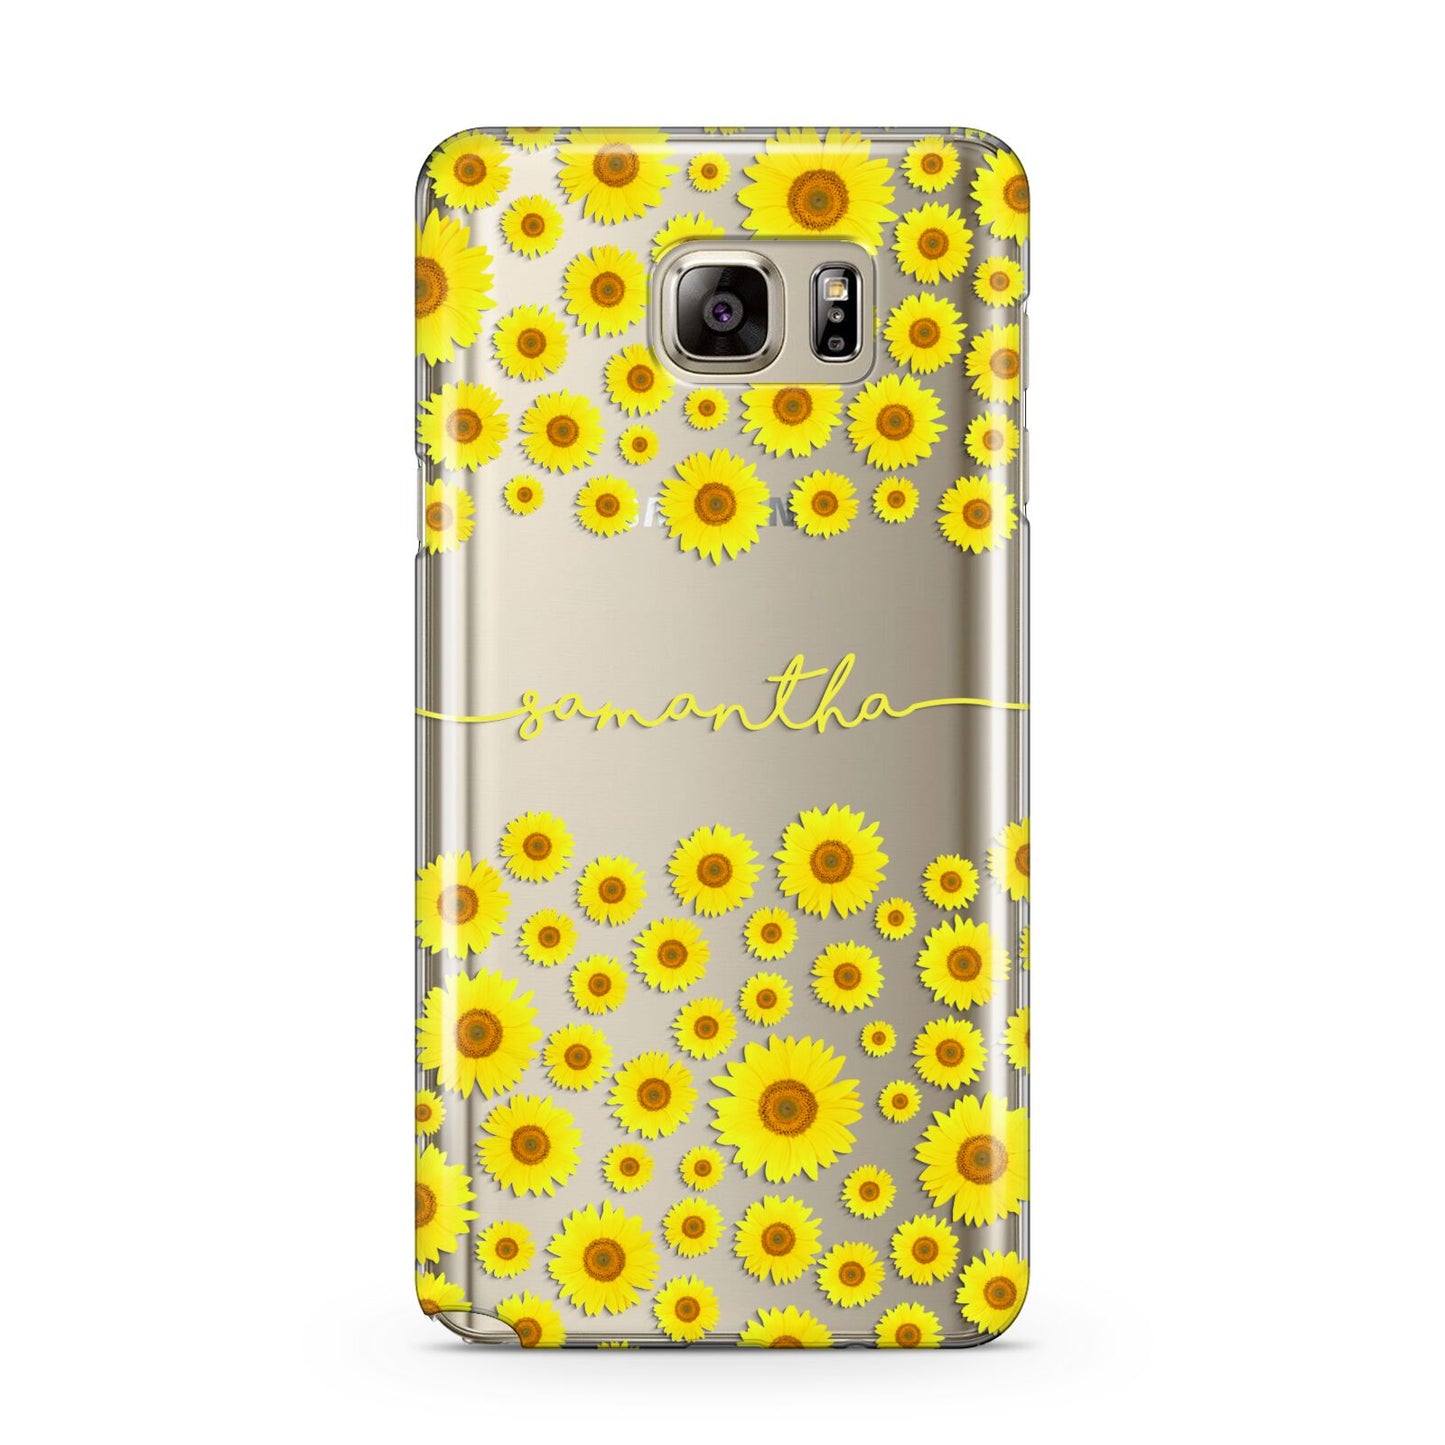 Personalised Sunflower Samsung Galaxy Note 5 Case